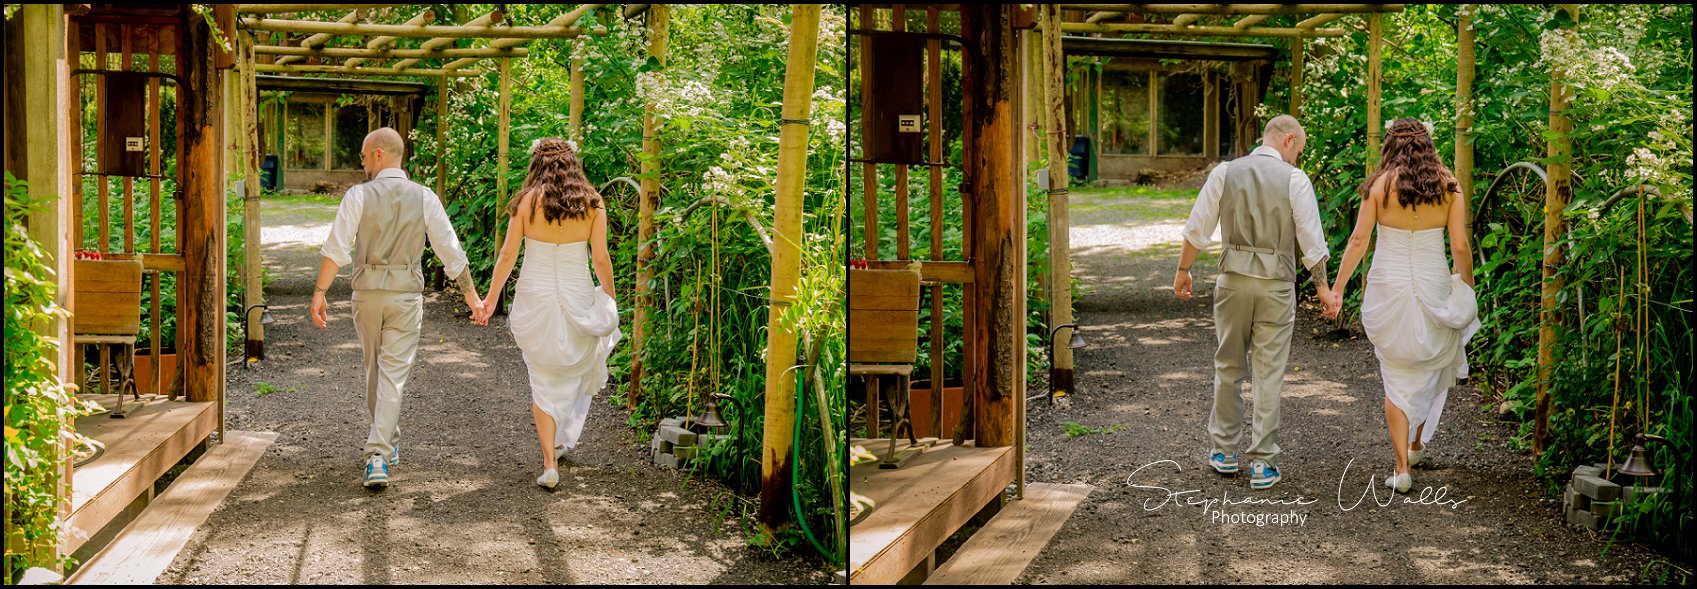 Gauthier050 Maroni Meadows DIY Wedding with Catherine and Tyler